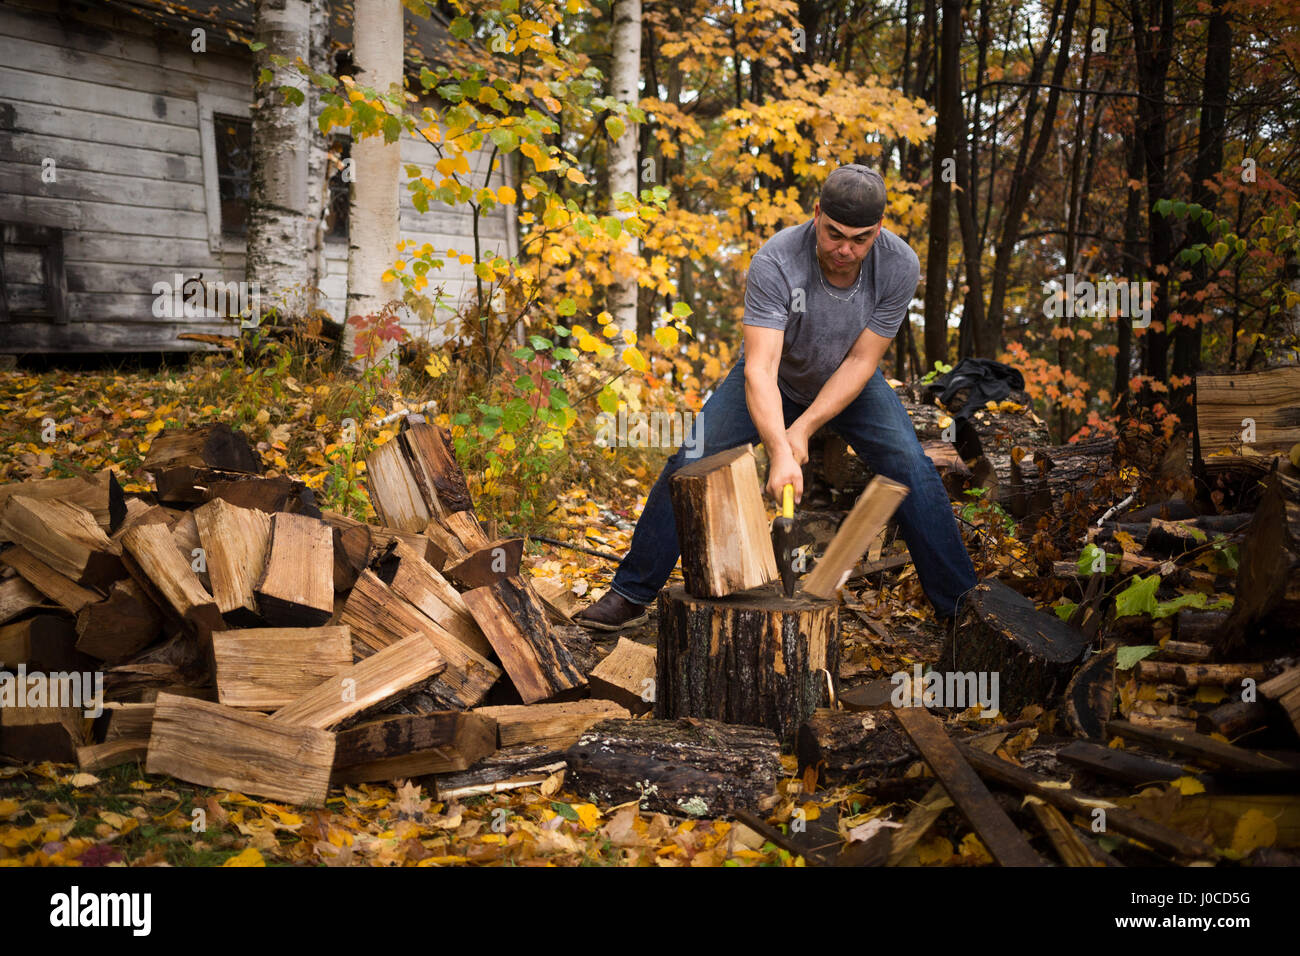 Mid adult man splitting logs in autumn forest, Upstate New York, USA Stock Photo